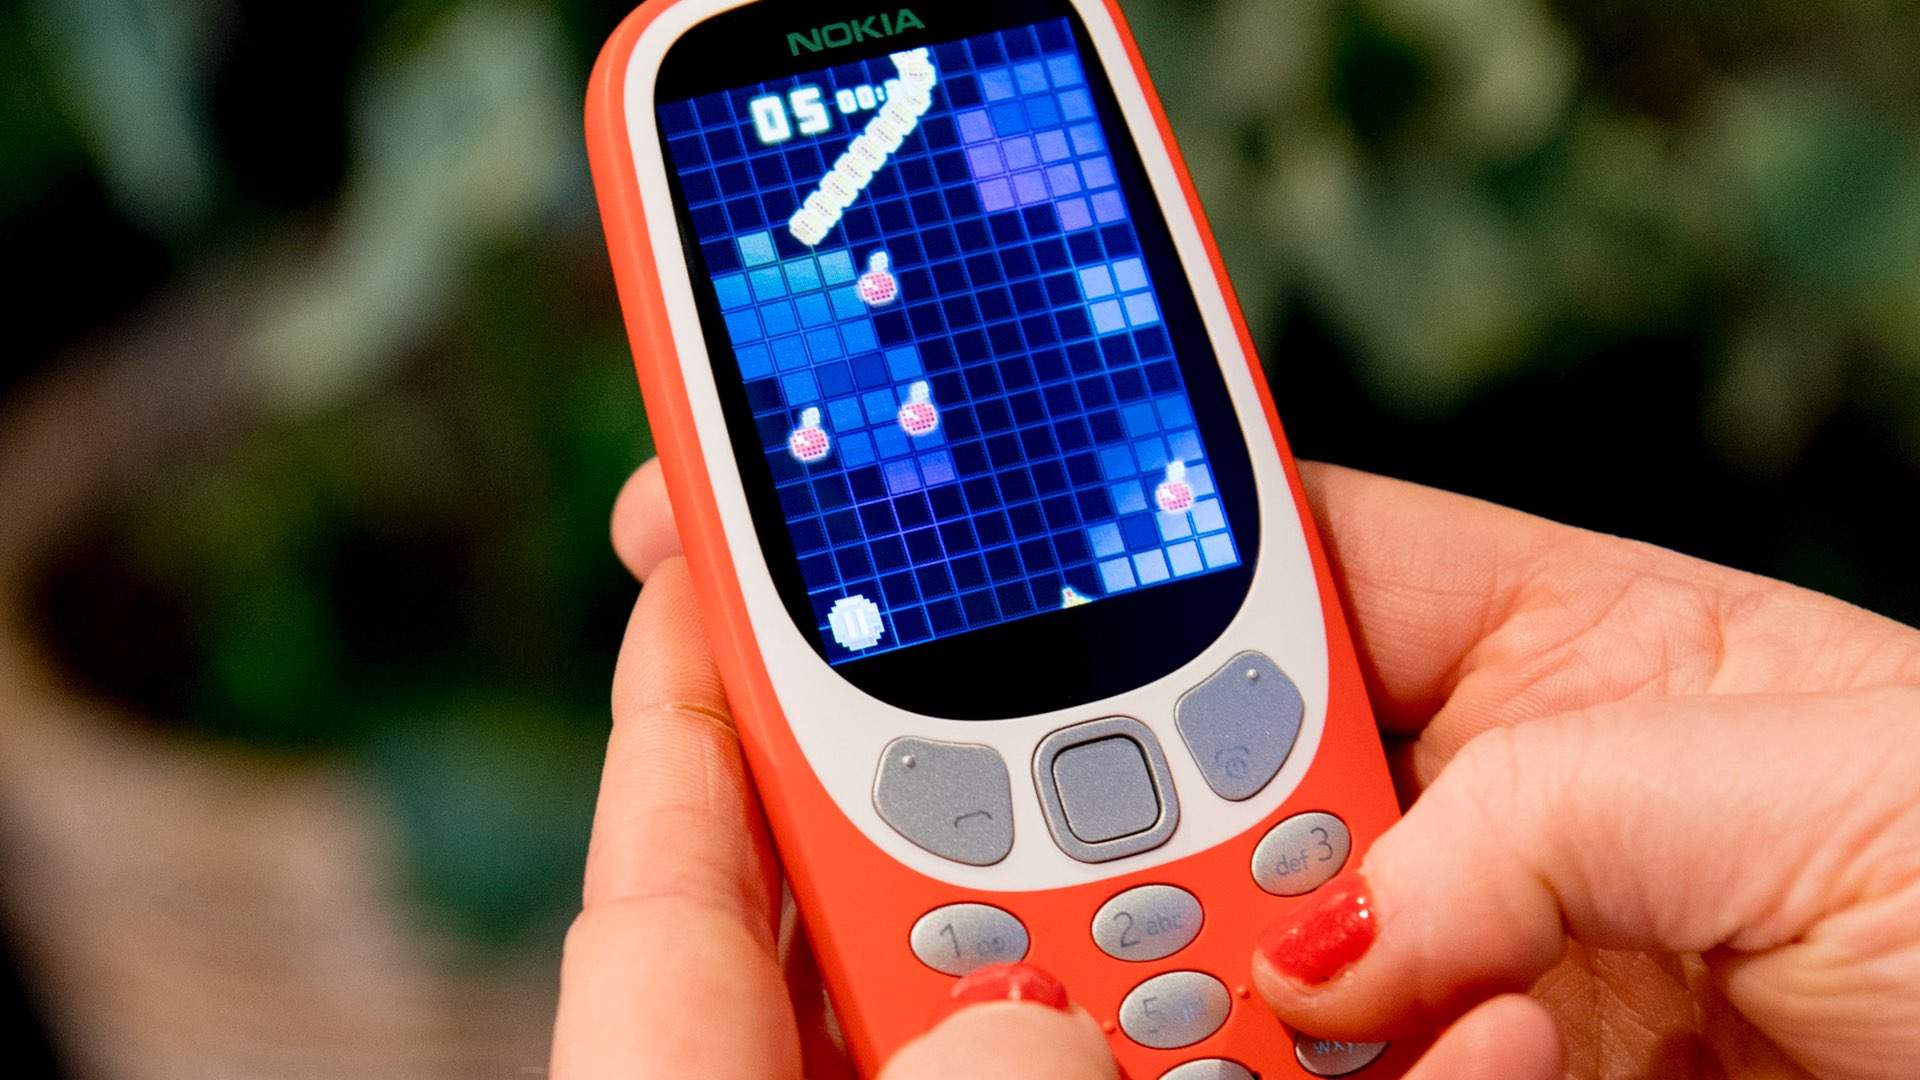 Nokia Is Re-Releasing Its Classic 3310 Snake-Bearing Phone in 3G